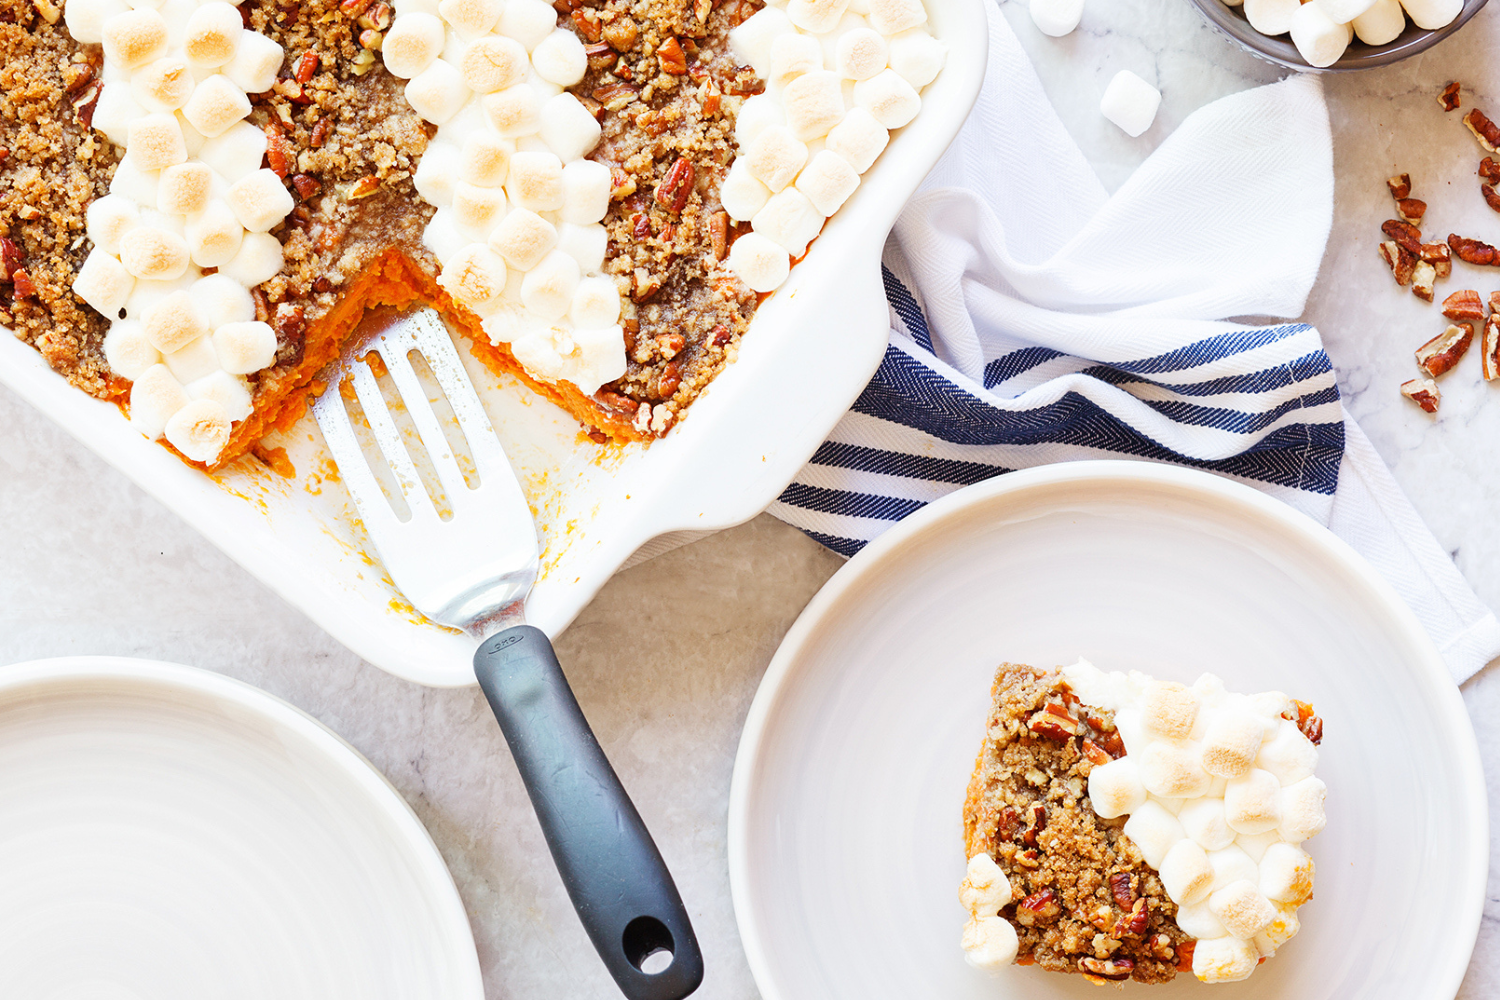 the Crowd-Pleasing Sweet Potato Casserole in a white ceramic baking dish, being served onto plates.